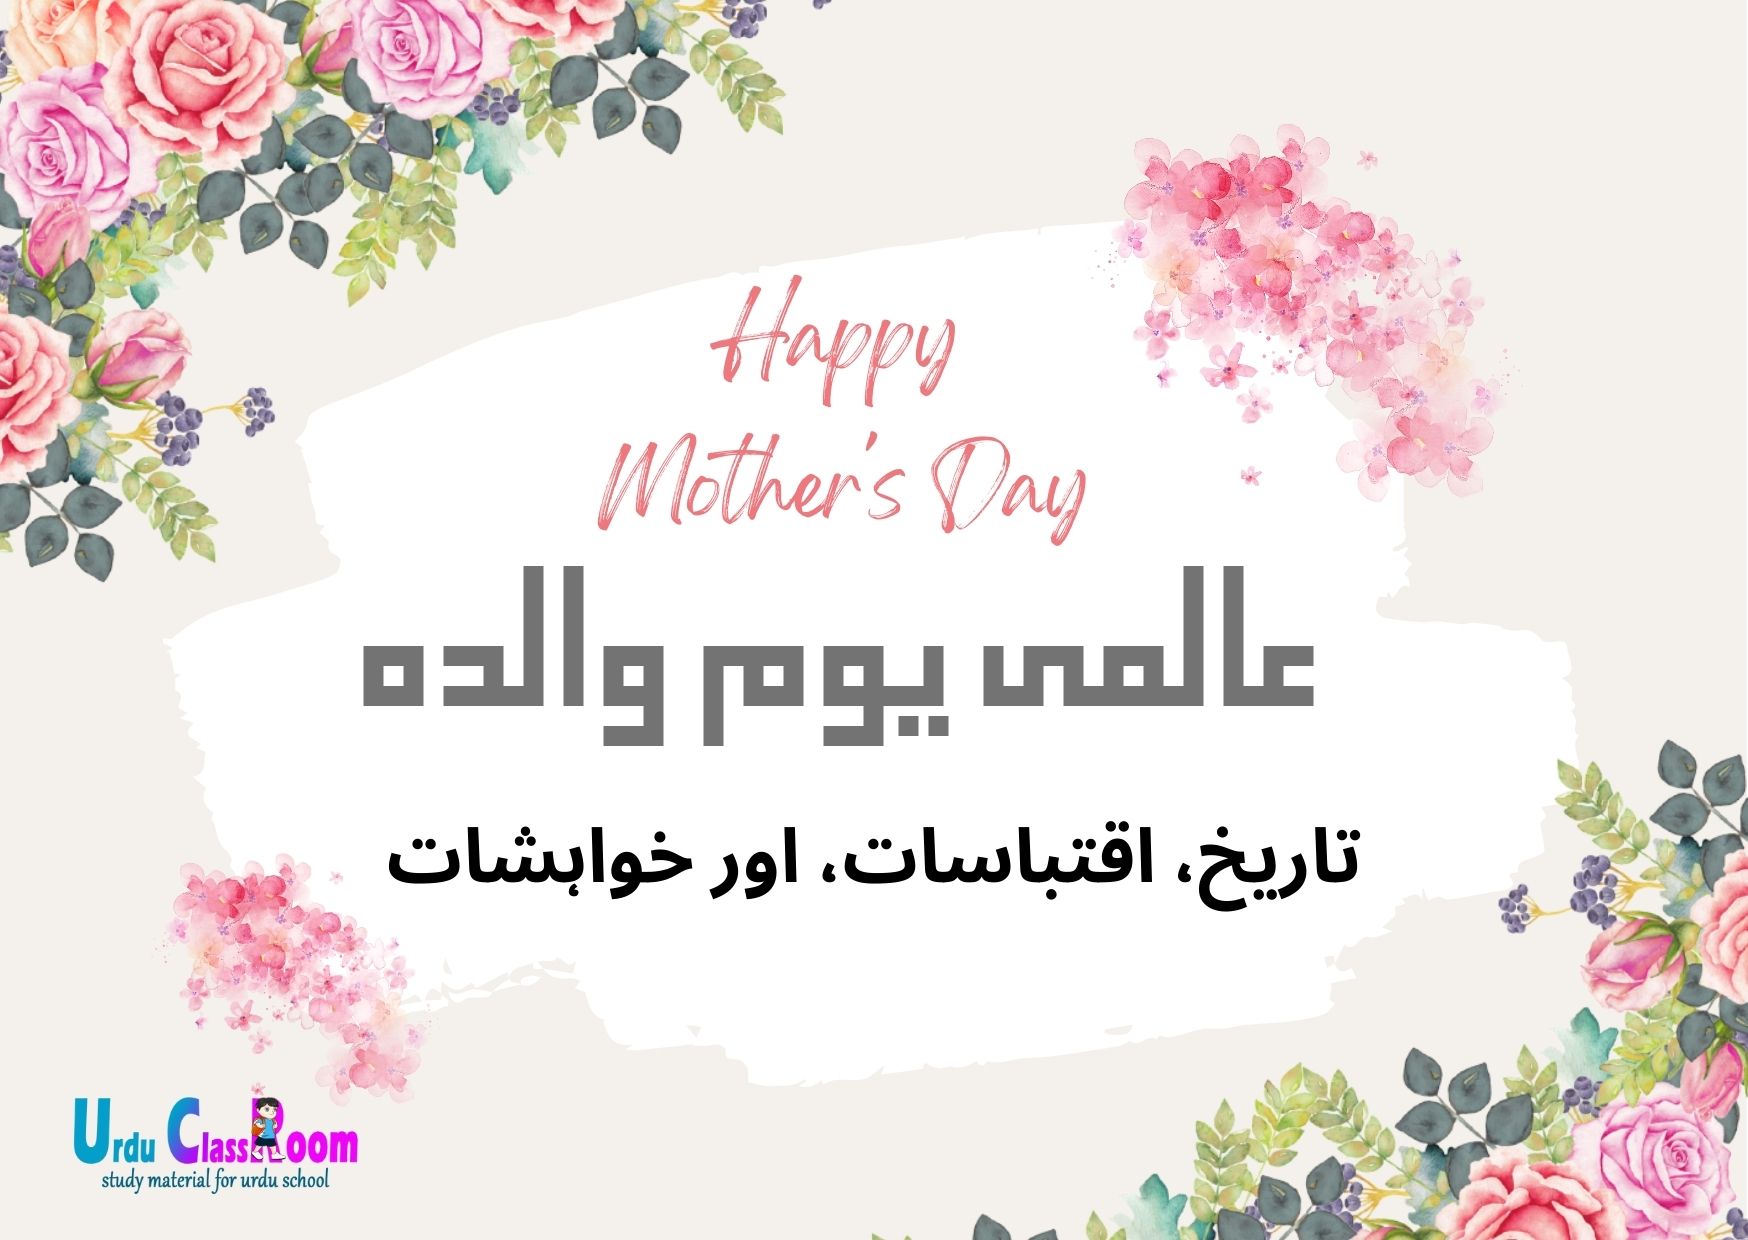 World Mothers Day: History, Quotes, and Wishes in urdu